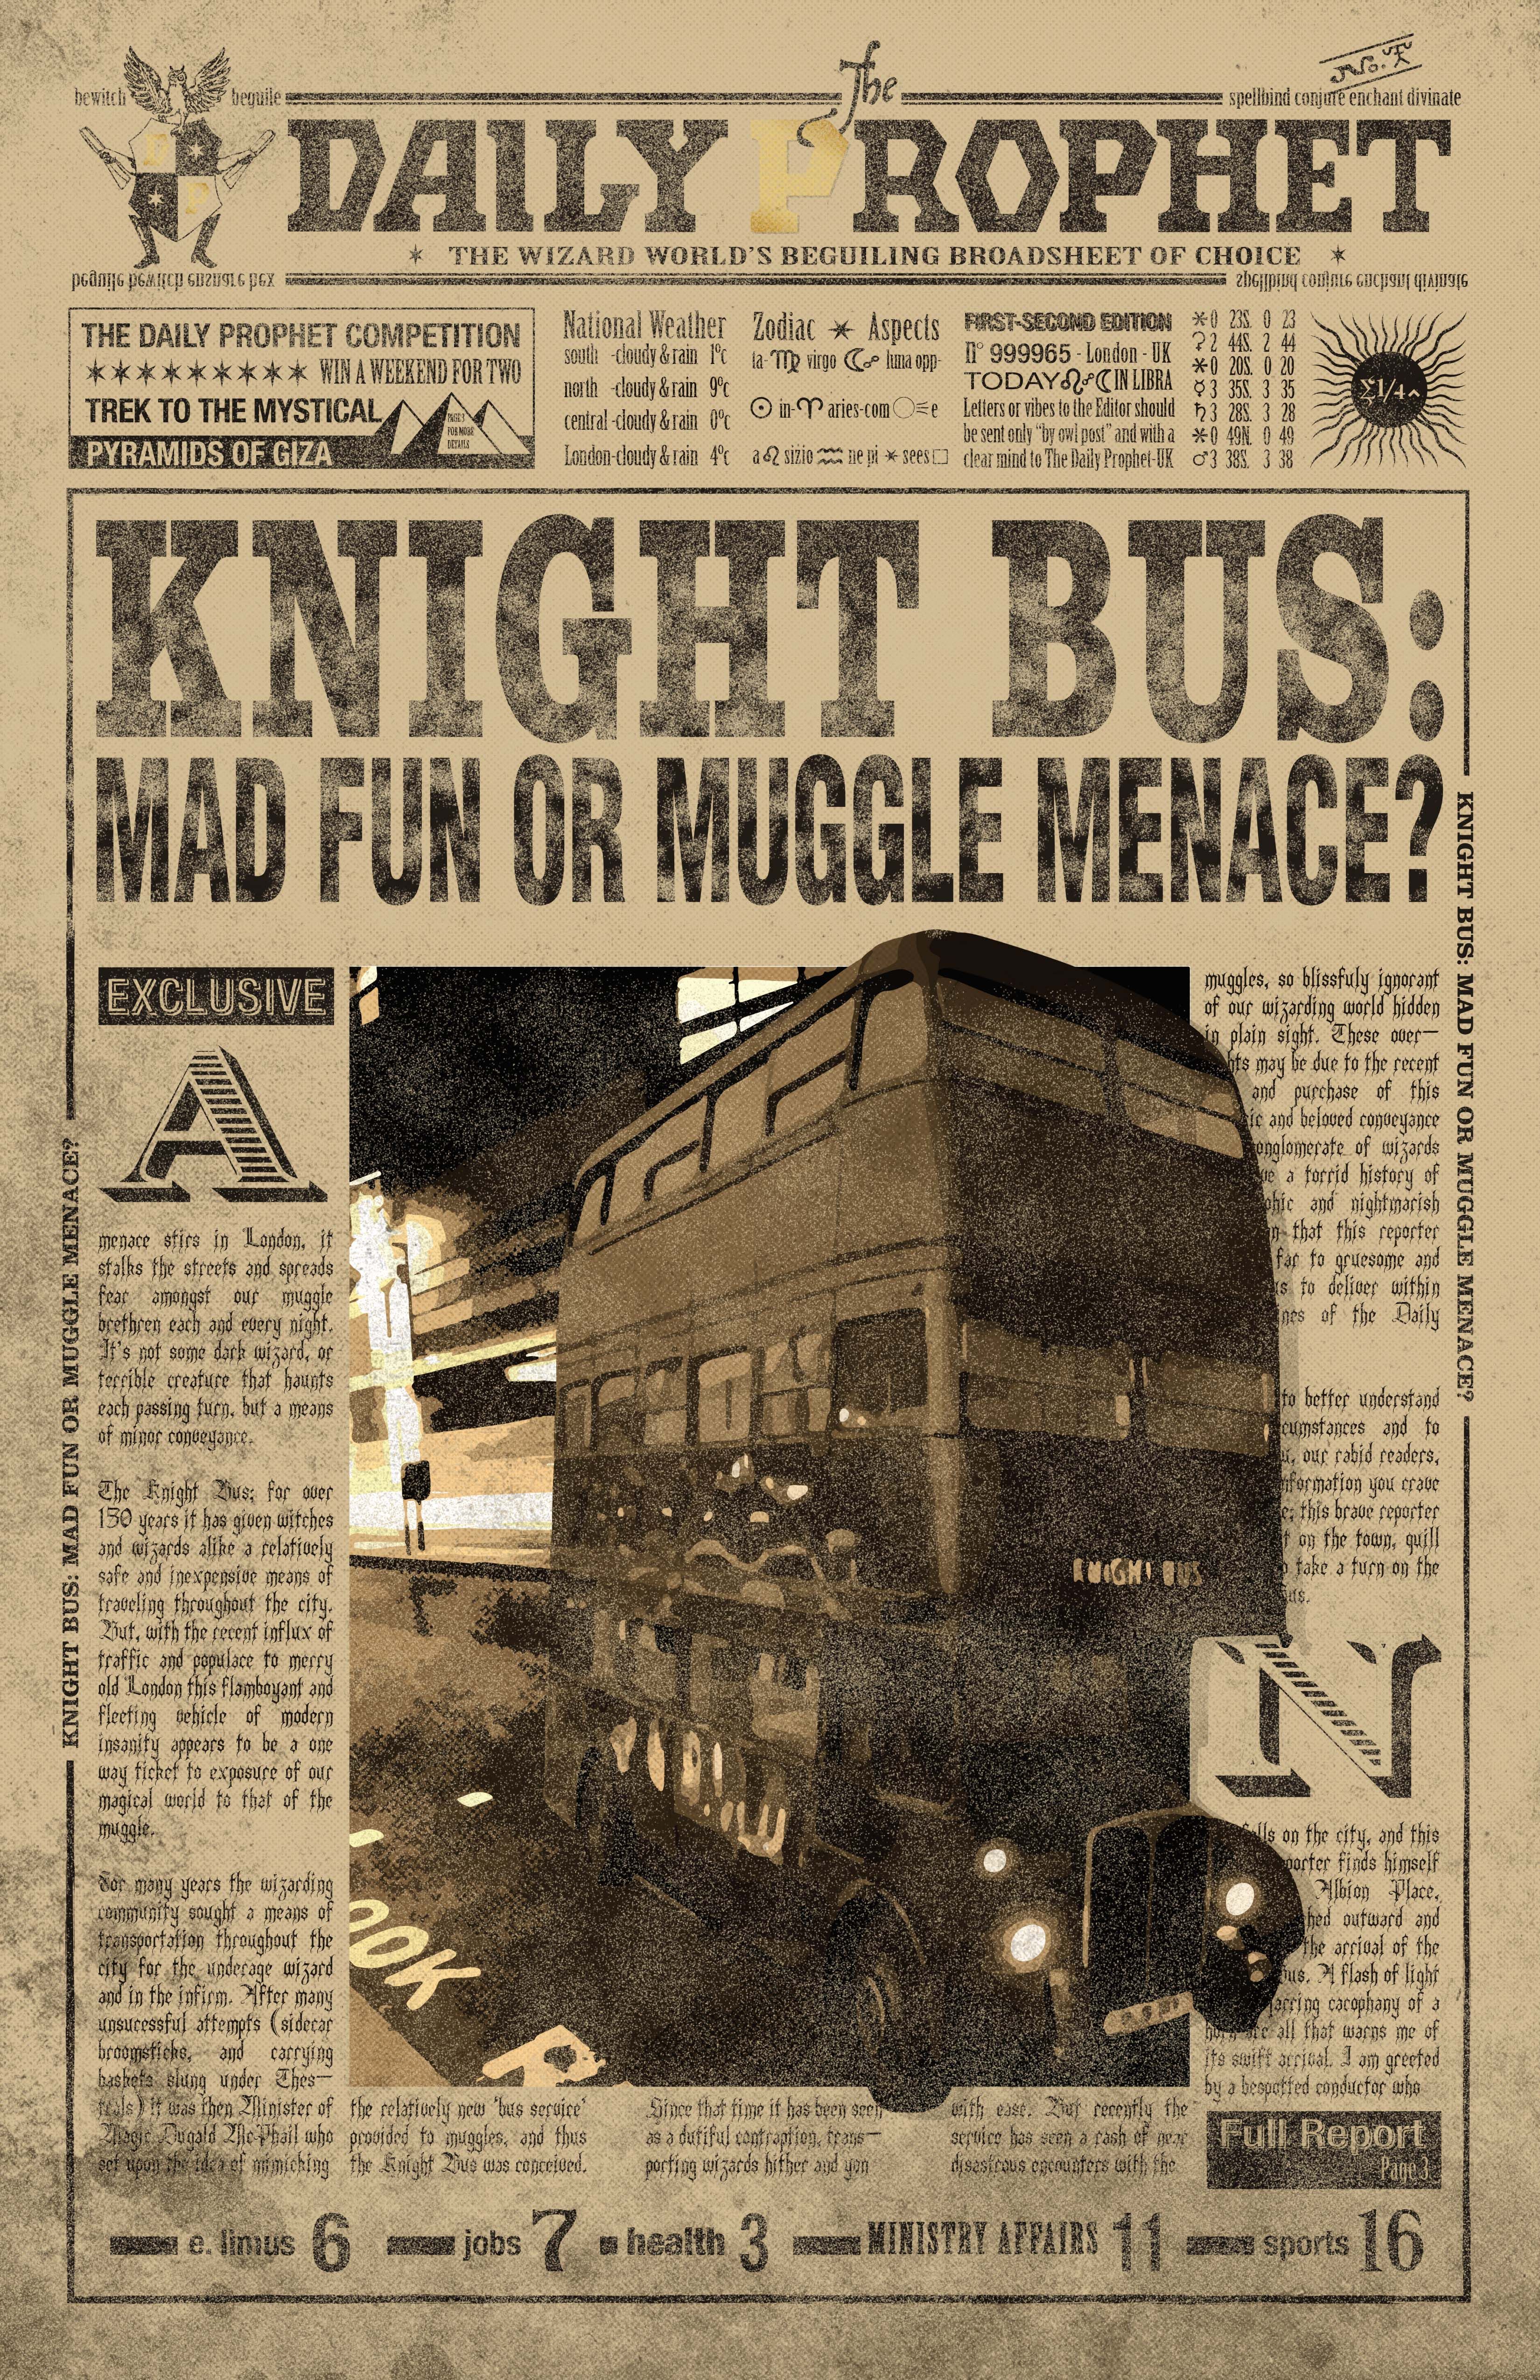 Knight Bus poster. Harry potter poster, Harry potter wall, Harry potter newspaper